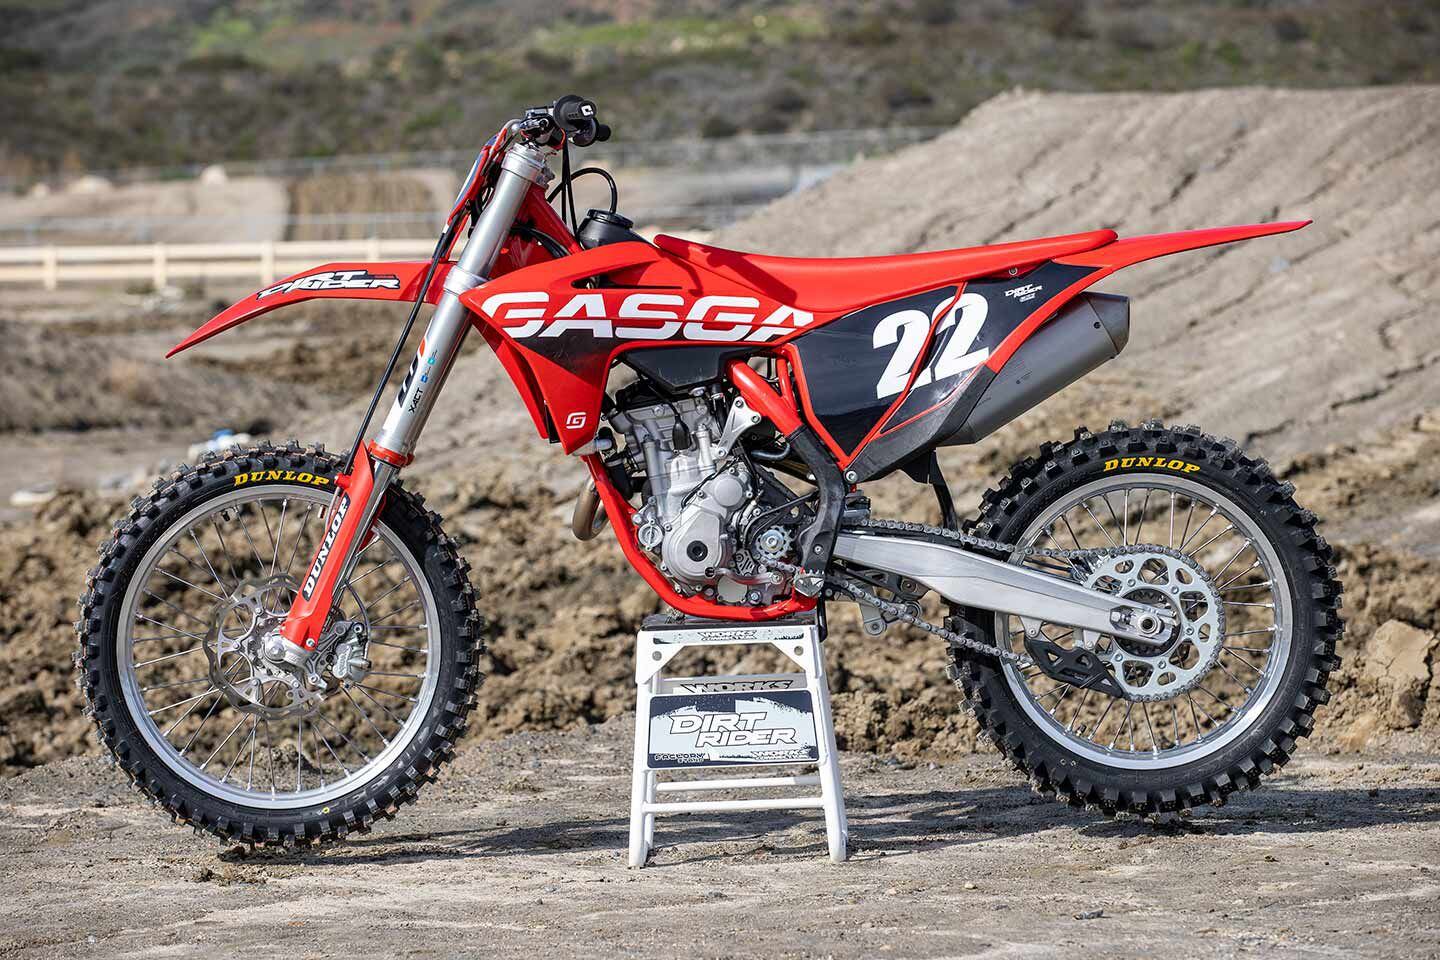 GasGas and Honda share the bragging rights of having the lightest 250 four-stroke motocross bike in 2023. The two red machines weigh 231 pounds on the <i>Dirt Rider</i> automotive scales.